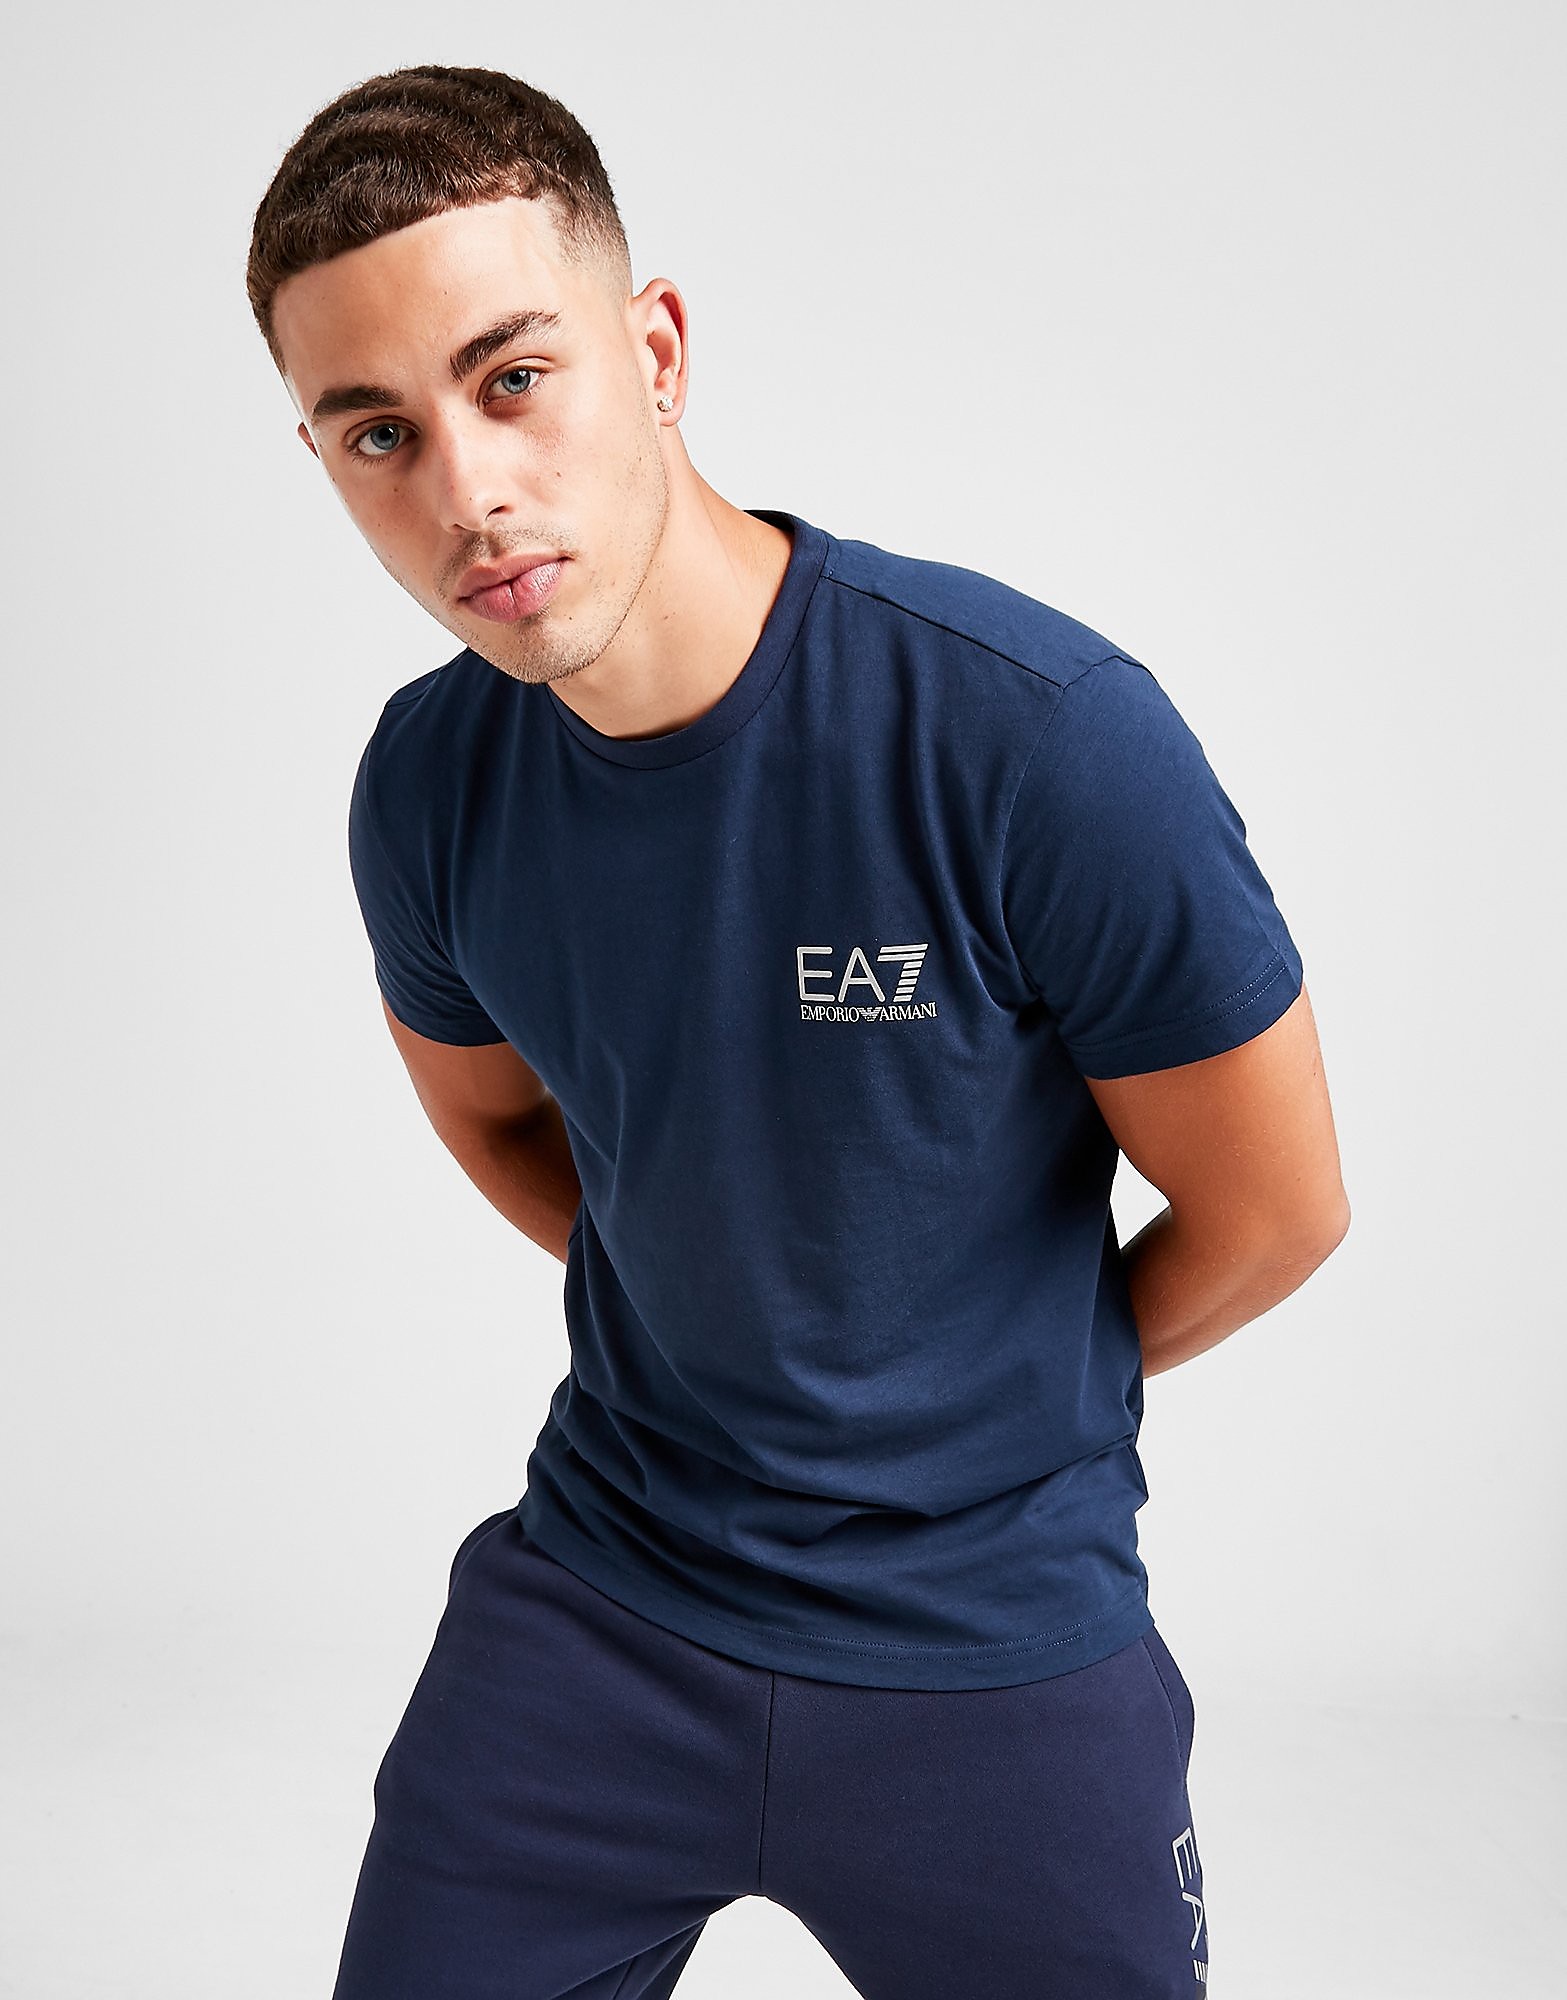 

Emporio Armani EA7 Reflective Tape Spine T-Shirt - Only at JD - BLUE - Mens, BLUE